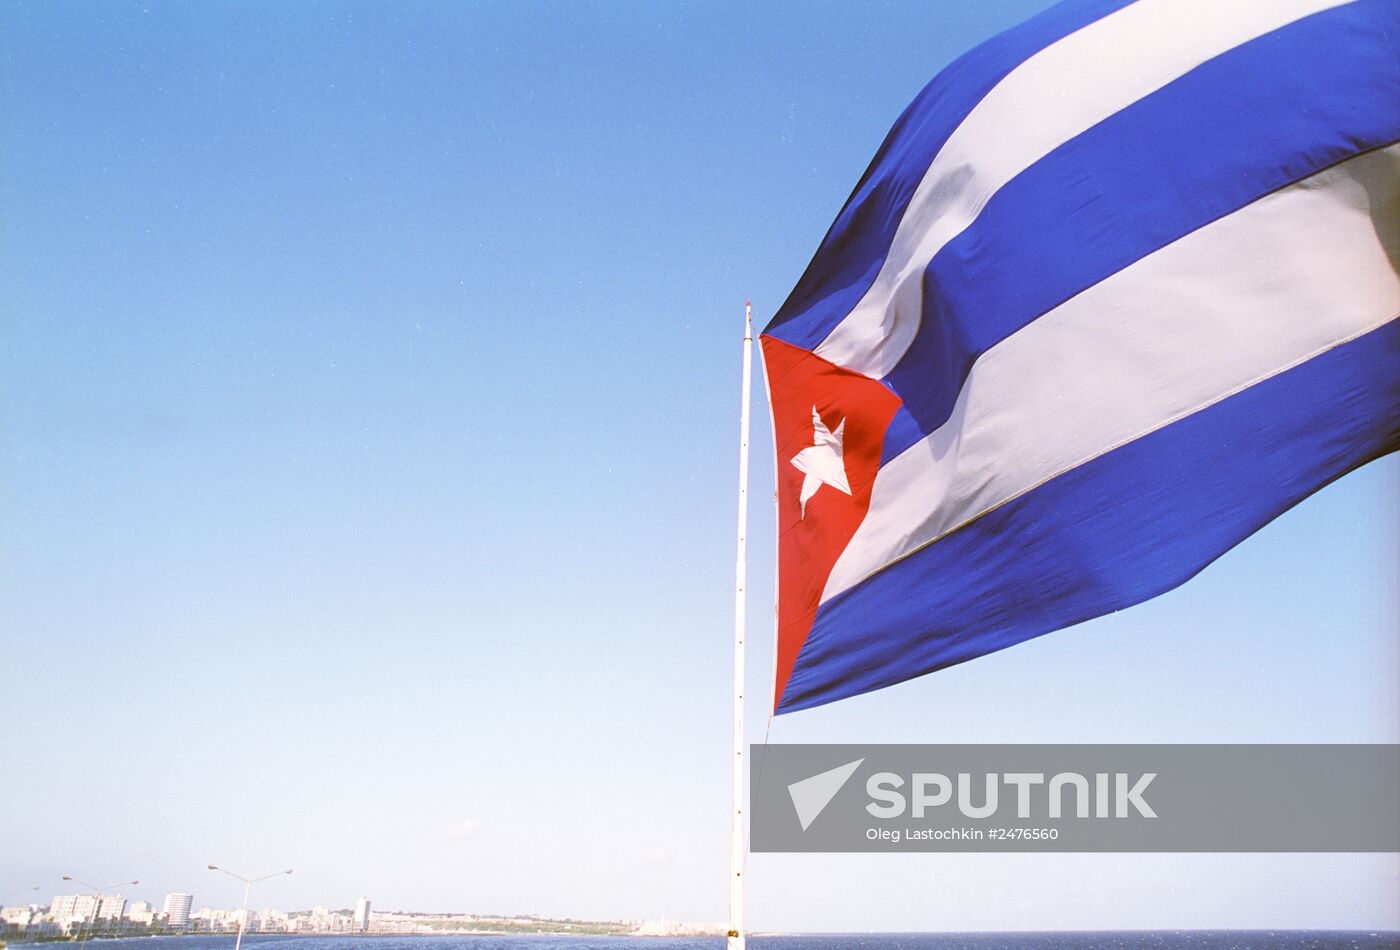 The Cuban state flag